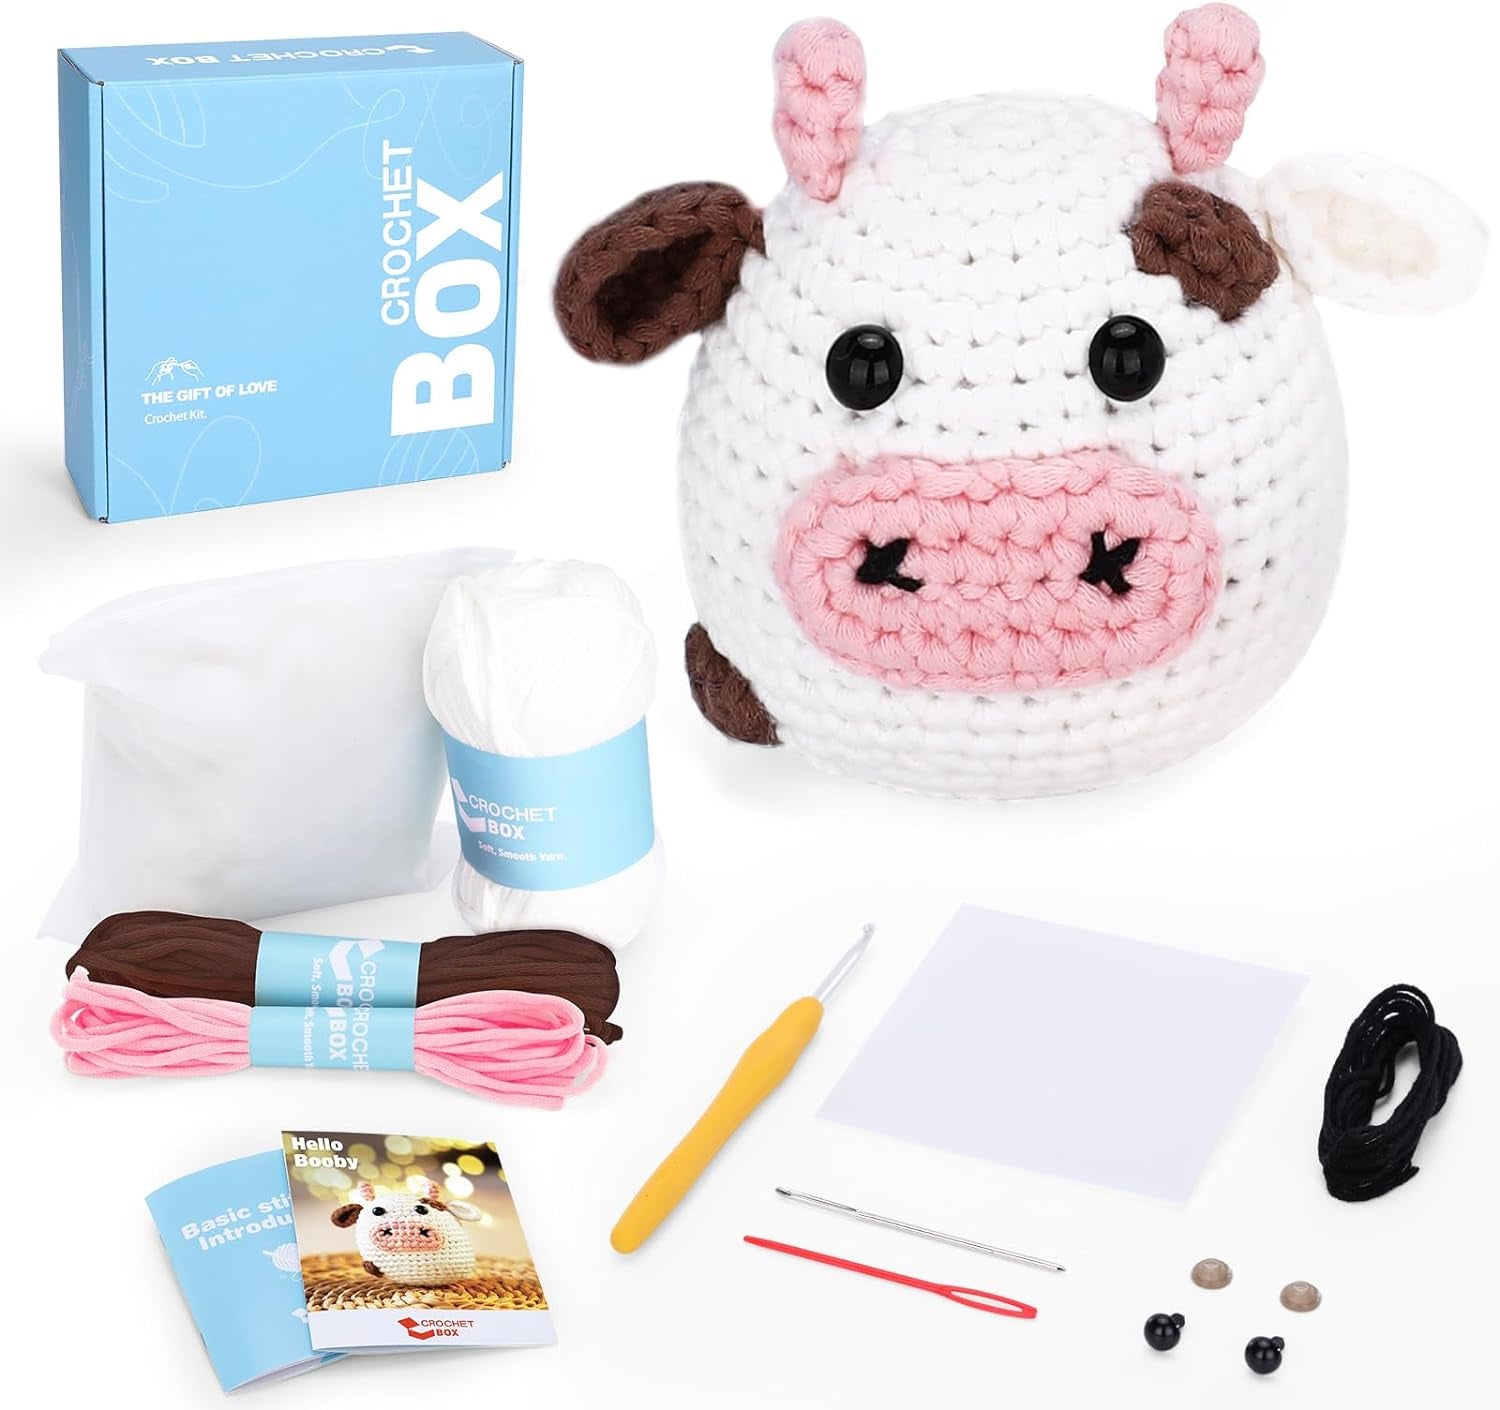 Crochet Kit for Beginners: Highland Cow Crochet Kit, Learn to Crochet, Include Easy Knitting Soft Yarn, Step-By-Step Video Tutorial, Hook, Holiday Birthday Gift for Adults and Kids(30%+ Yarn)